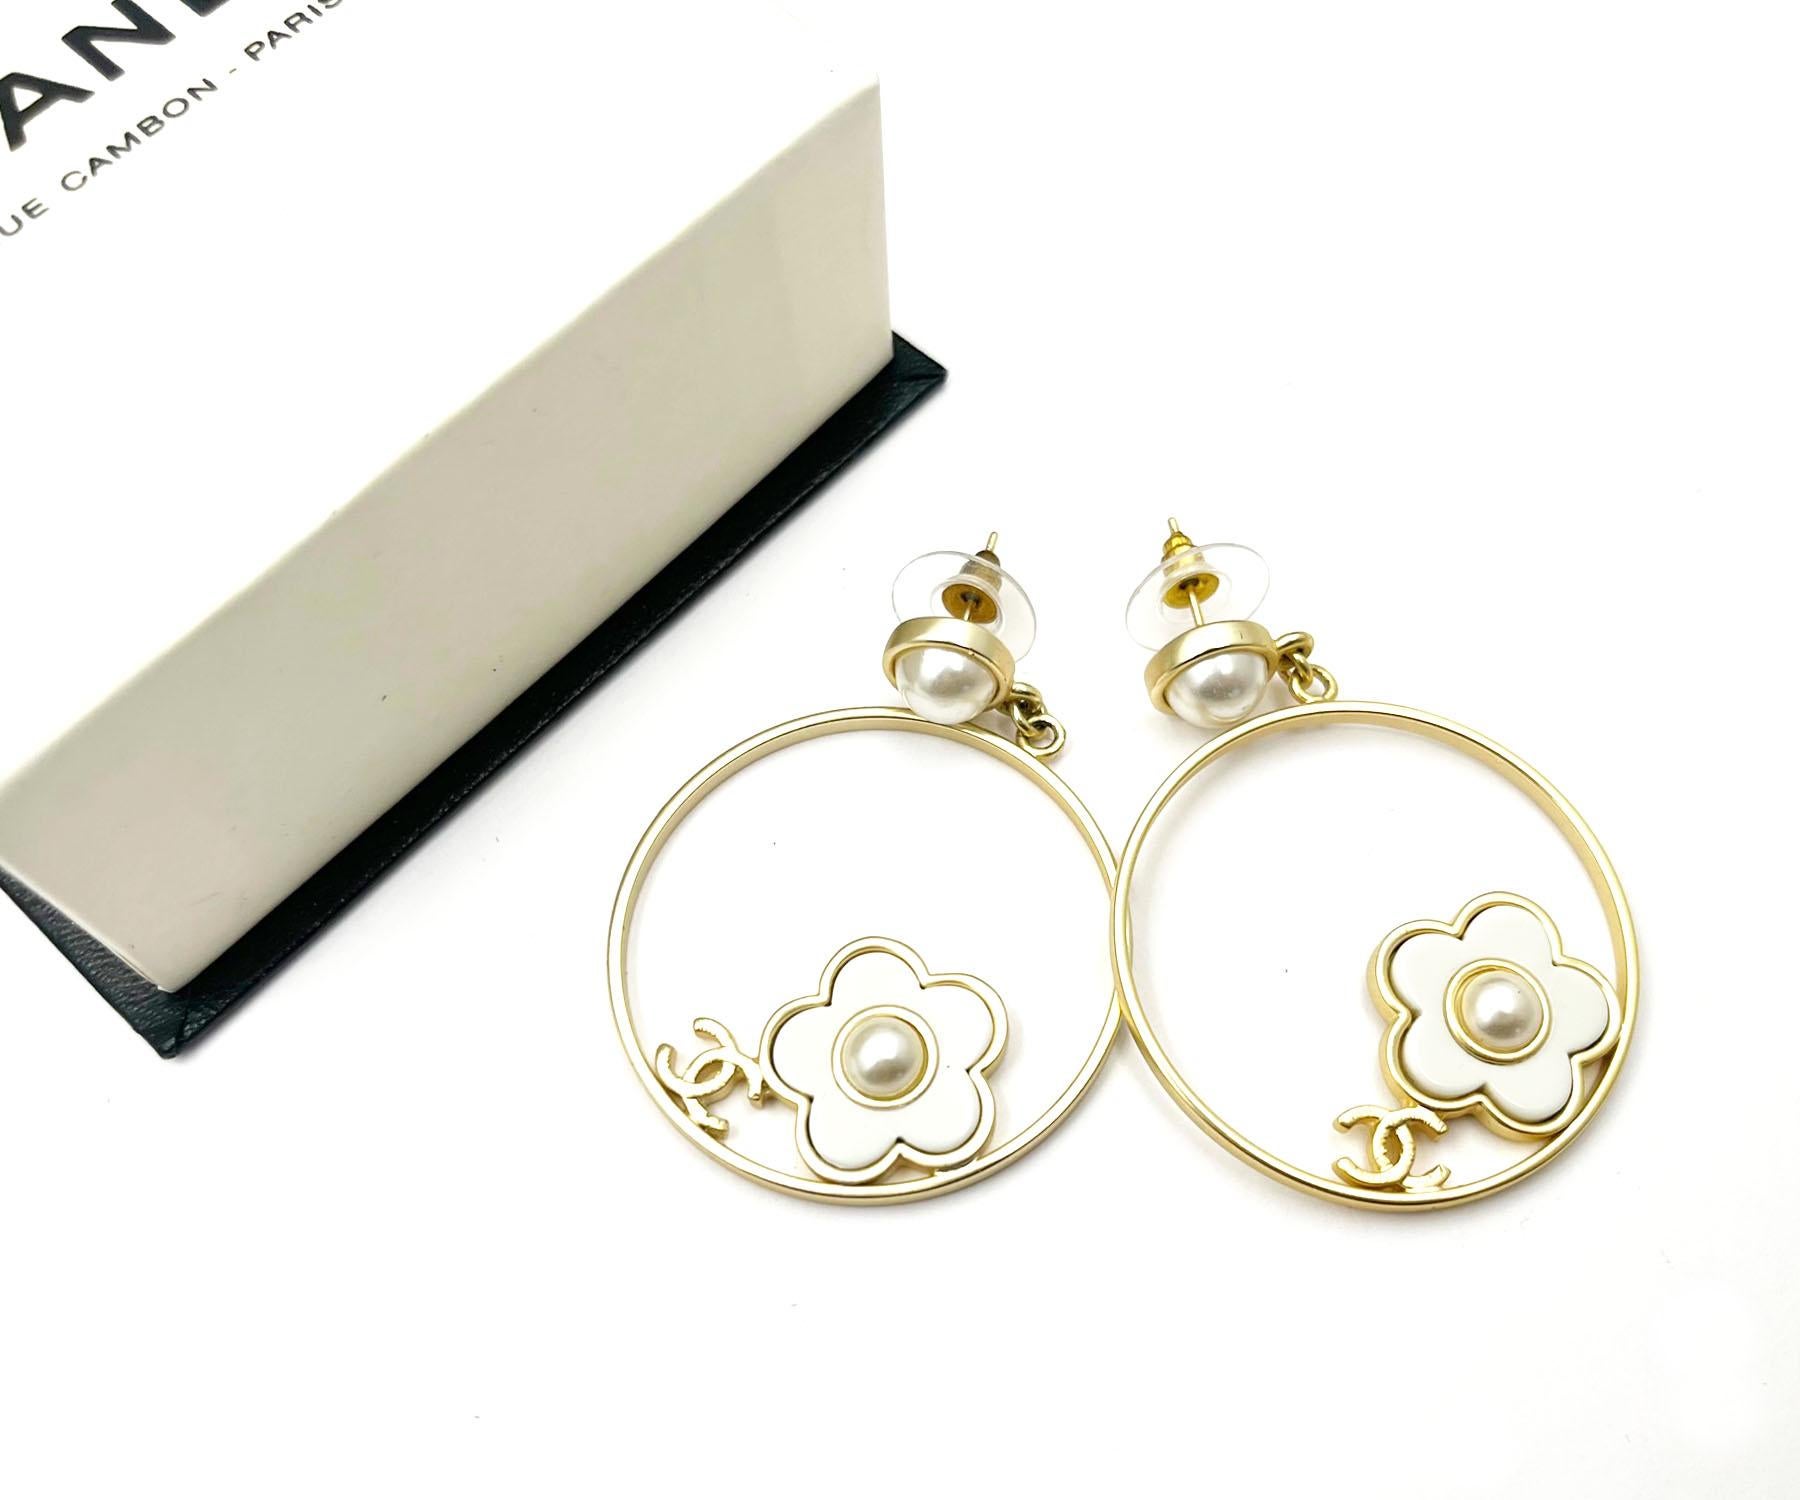 Chanel Gold CC White Daisy Round Ring Large Piercing Earrings

* Marked 18
* Made in France
* Comes with the original box

-It is approximately 2.1